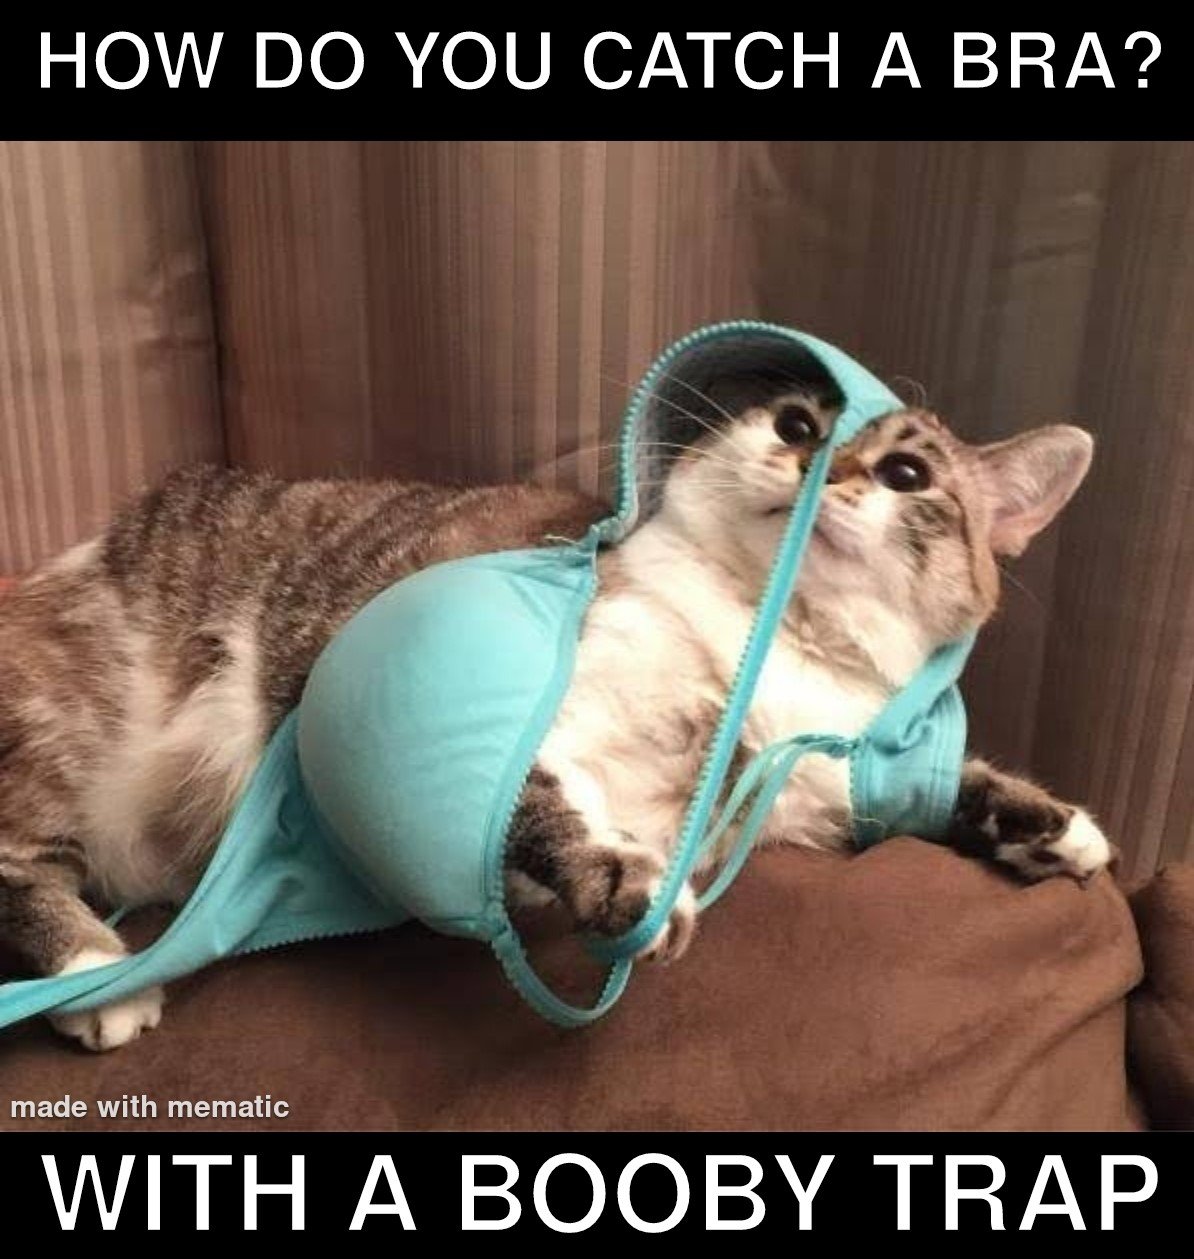 Booby trapping